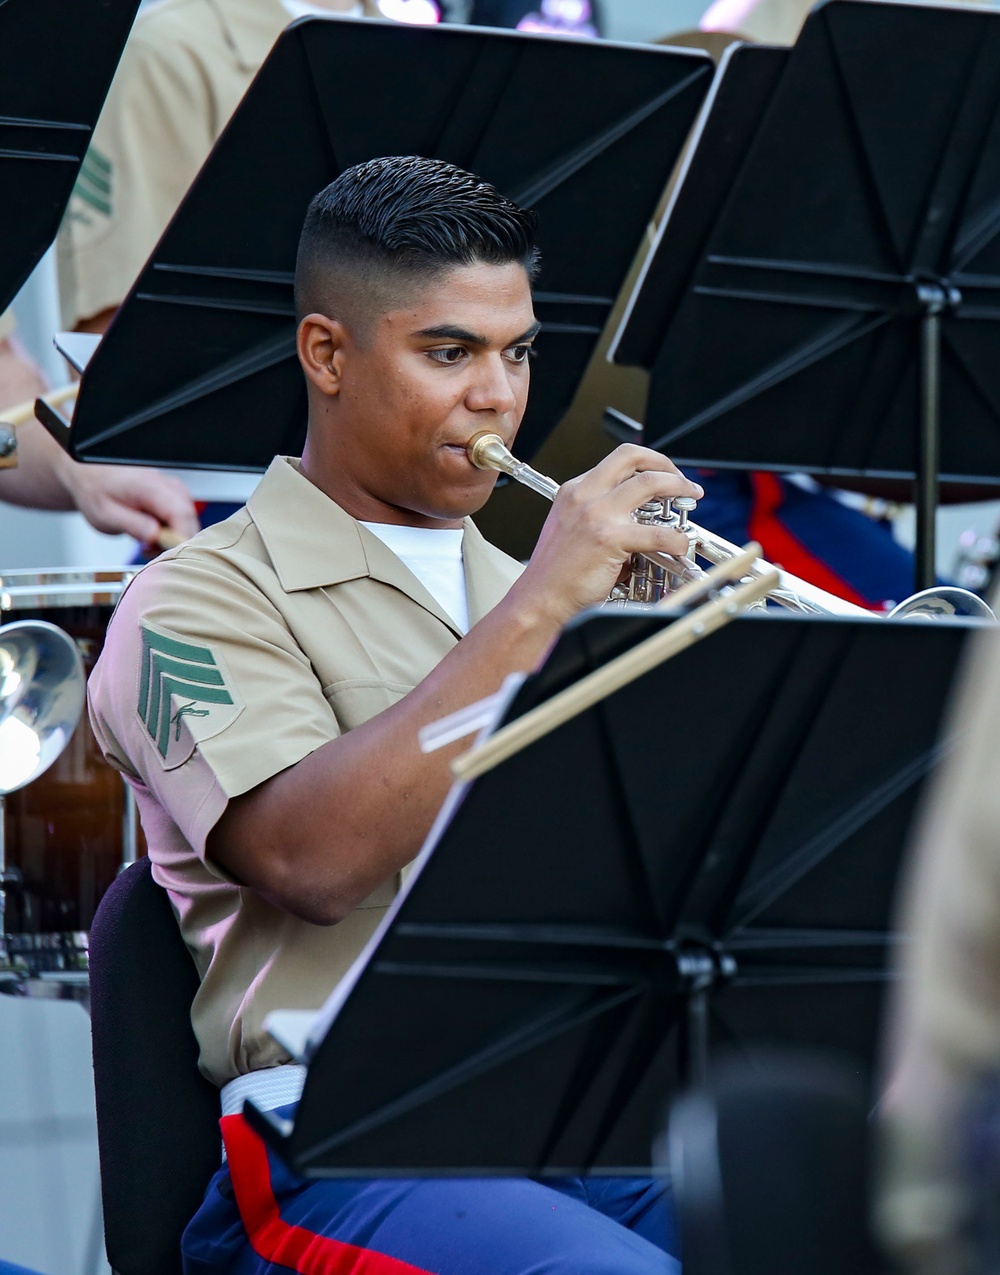 Sounds of Summer; Quantico Marine Band ends summer concert series on a high note